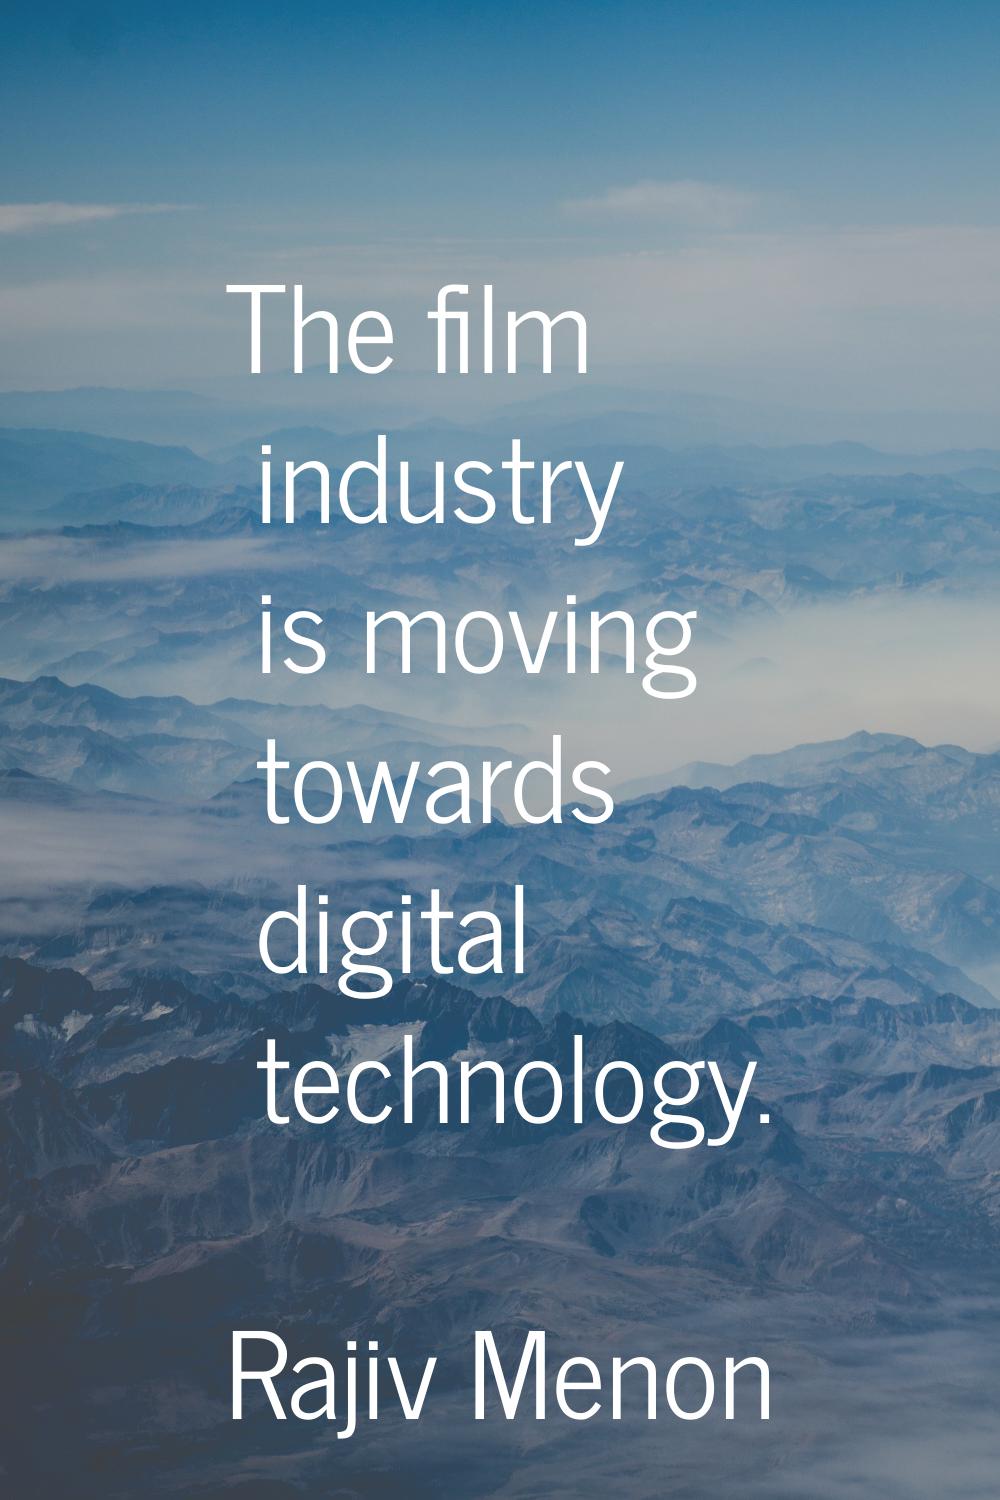 The film industry is moving towards digital technology.